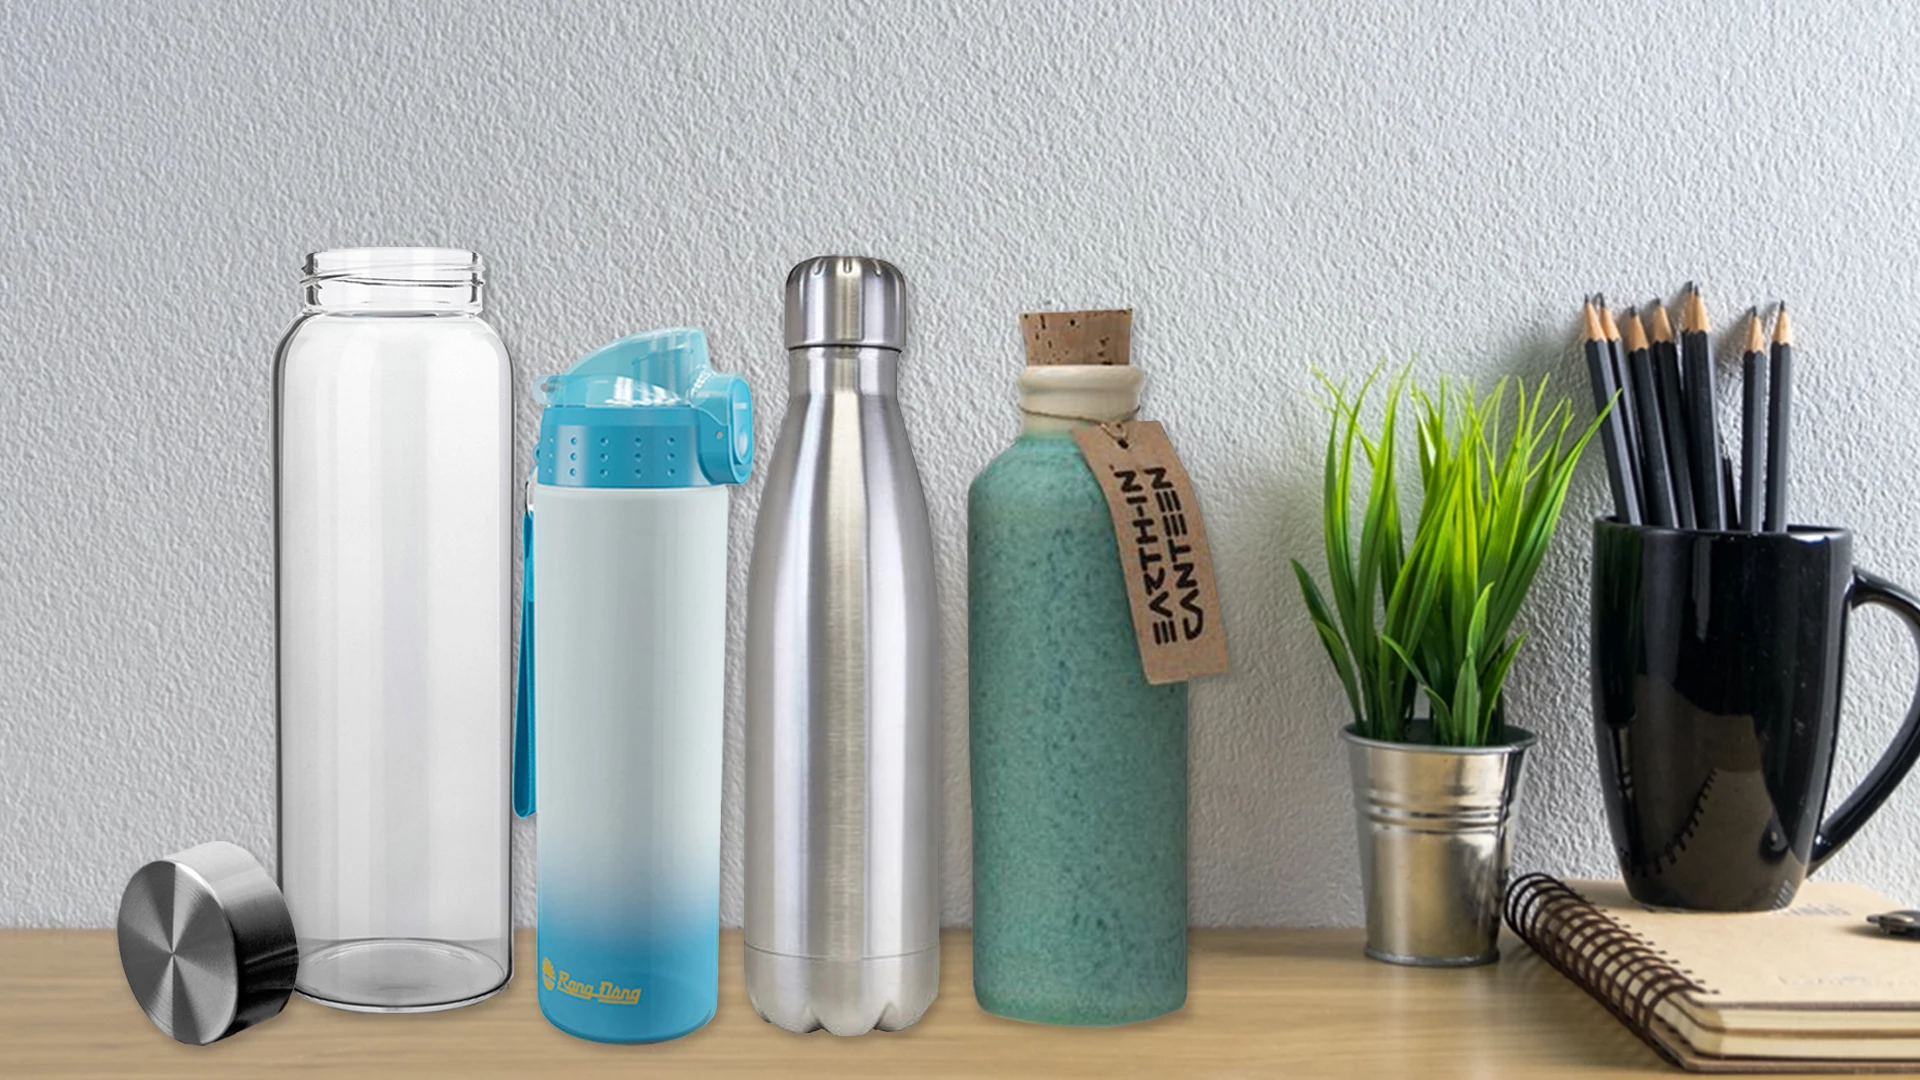 A quality plastic water bottle offers strong advantages